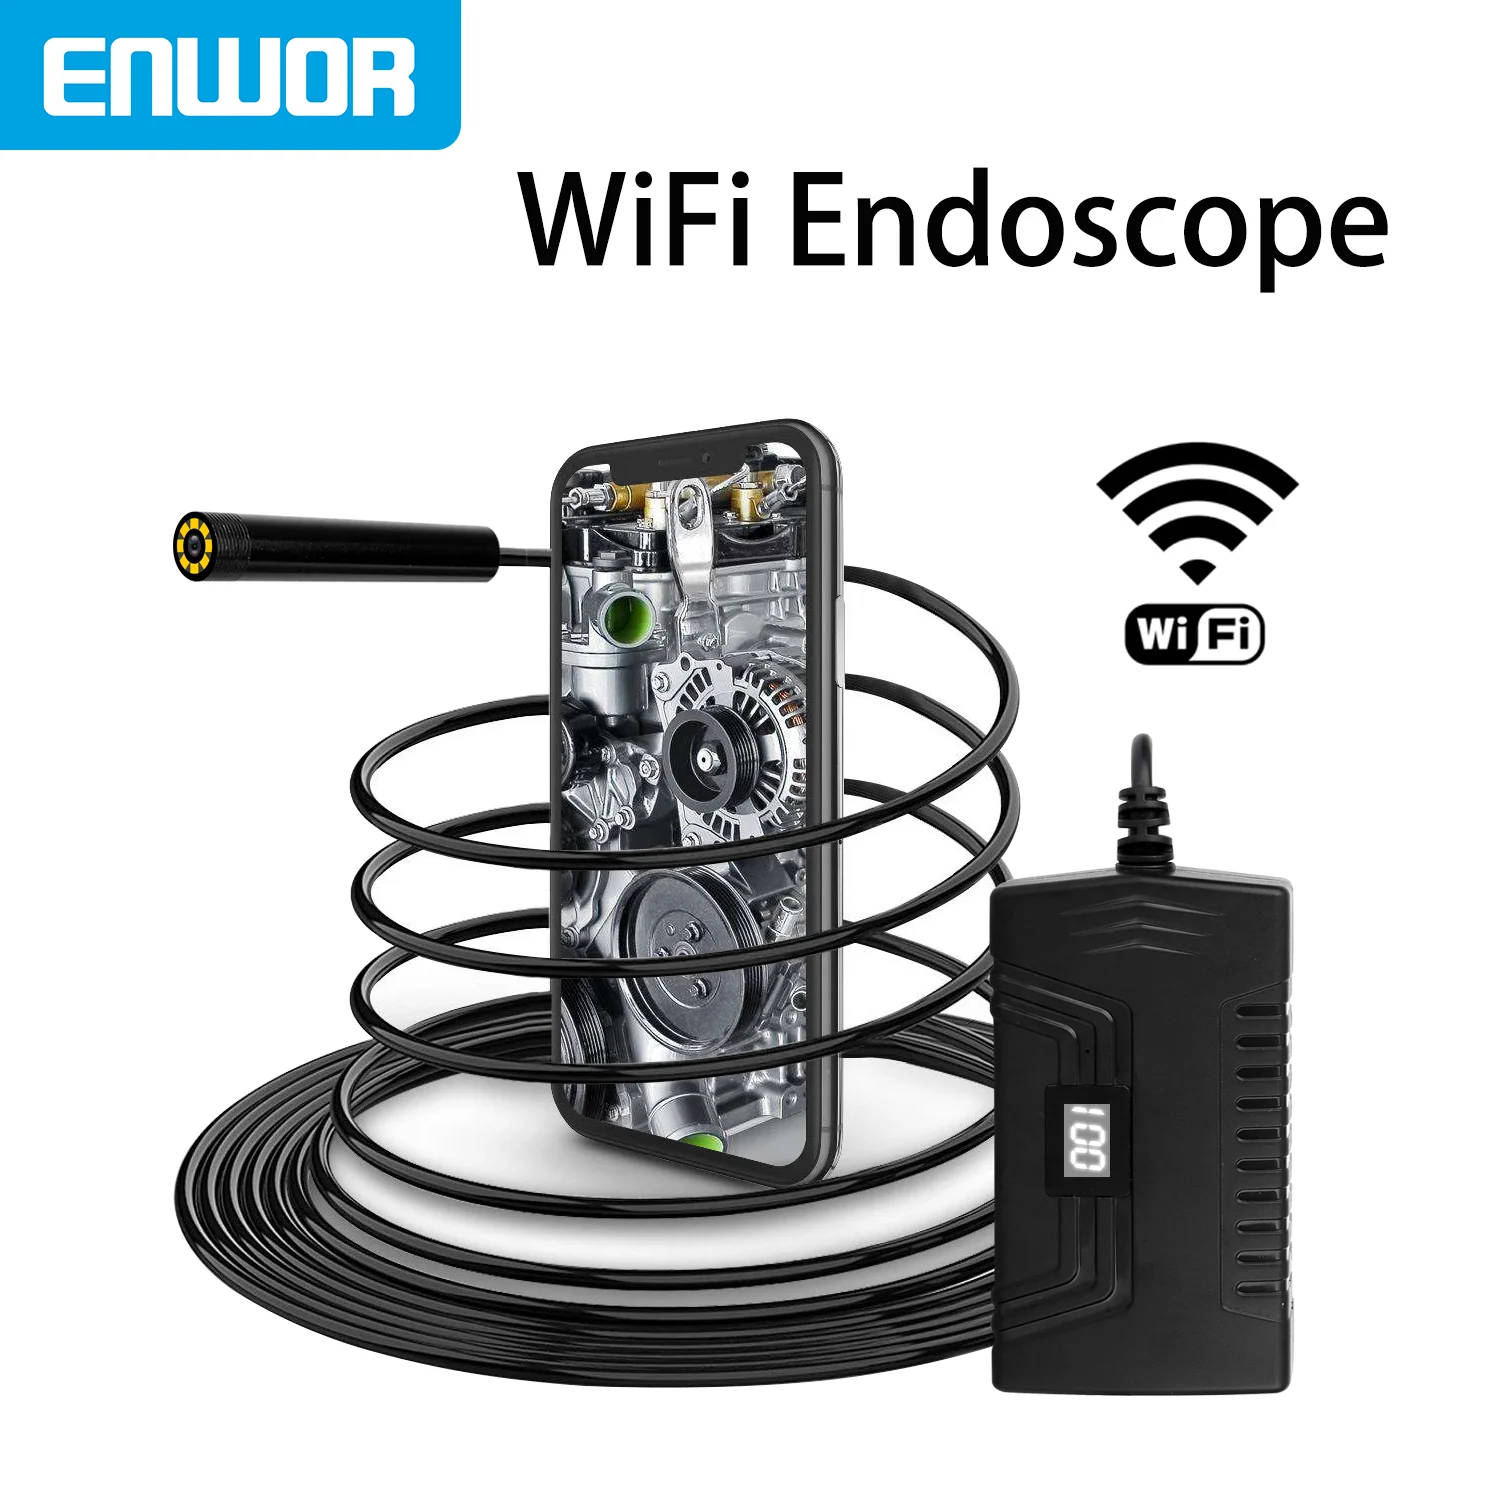 

ENWOR 5.5mm Wireless Endoscope Mini Camera Rigid Cable HD1080P IP67 Waterproof Lens WiFi Inspection Borescope for Android/ios